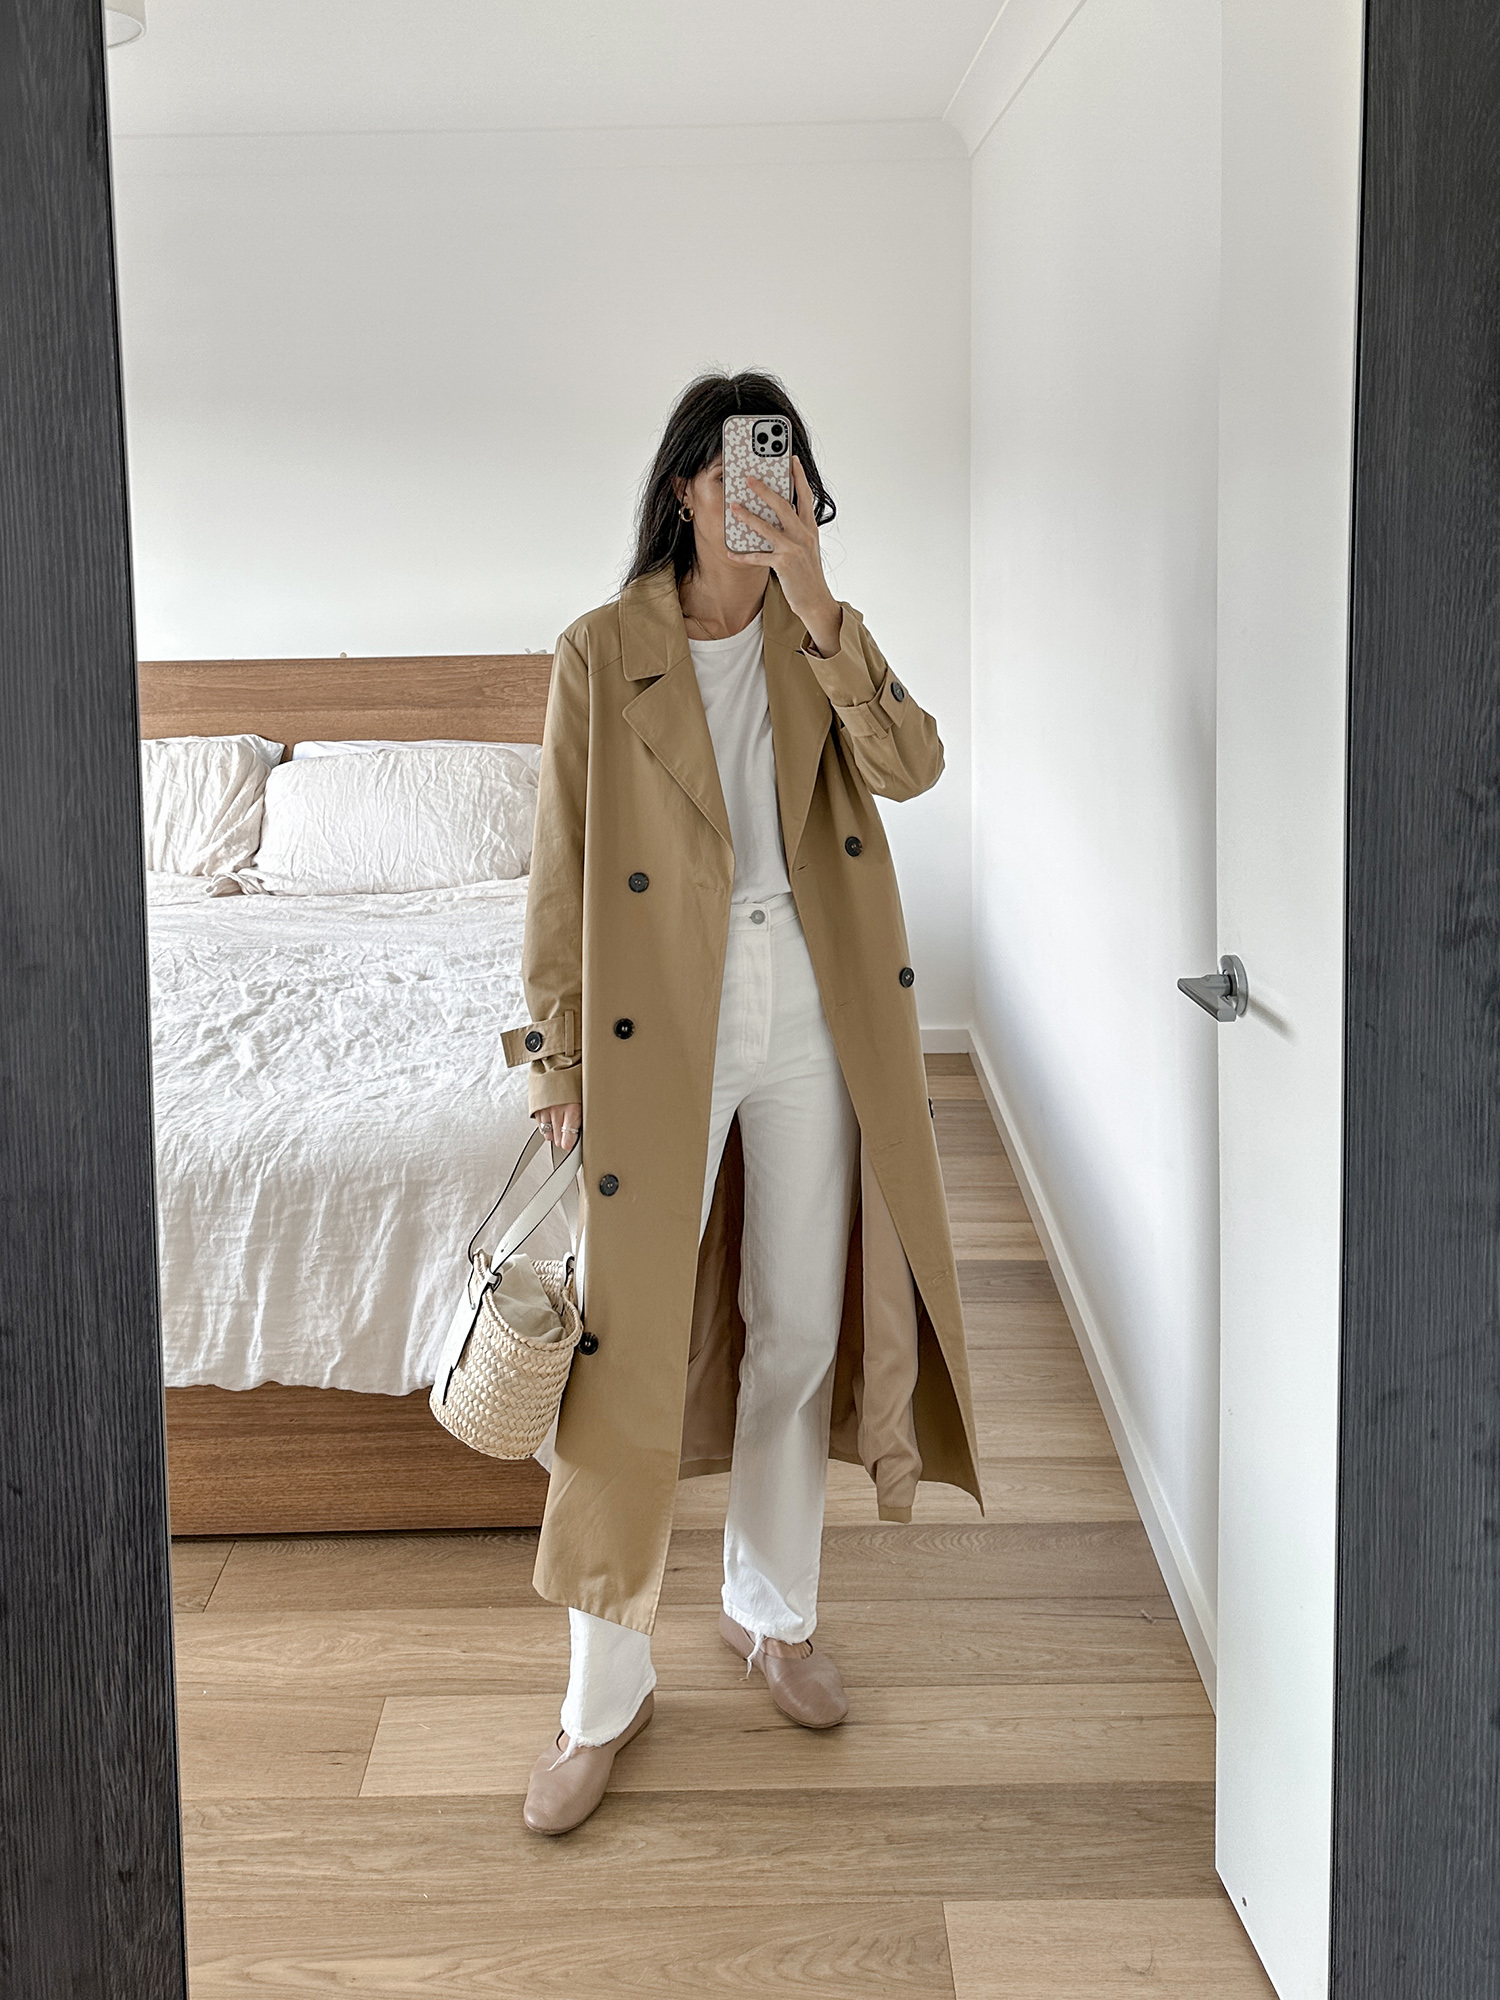 Levis white ribcage jeans with DISSH foster trench coat and Everlane day gloves